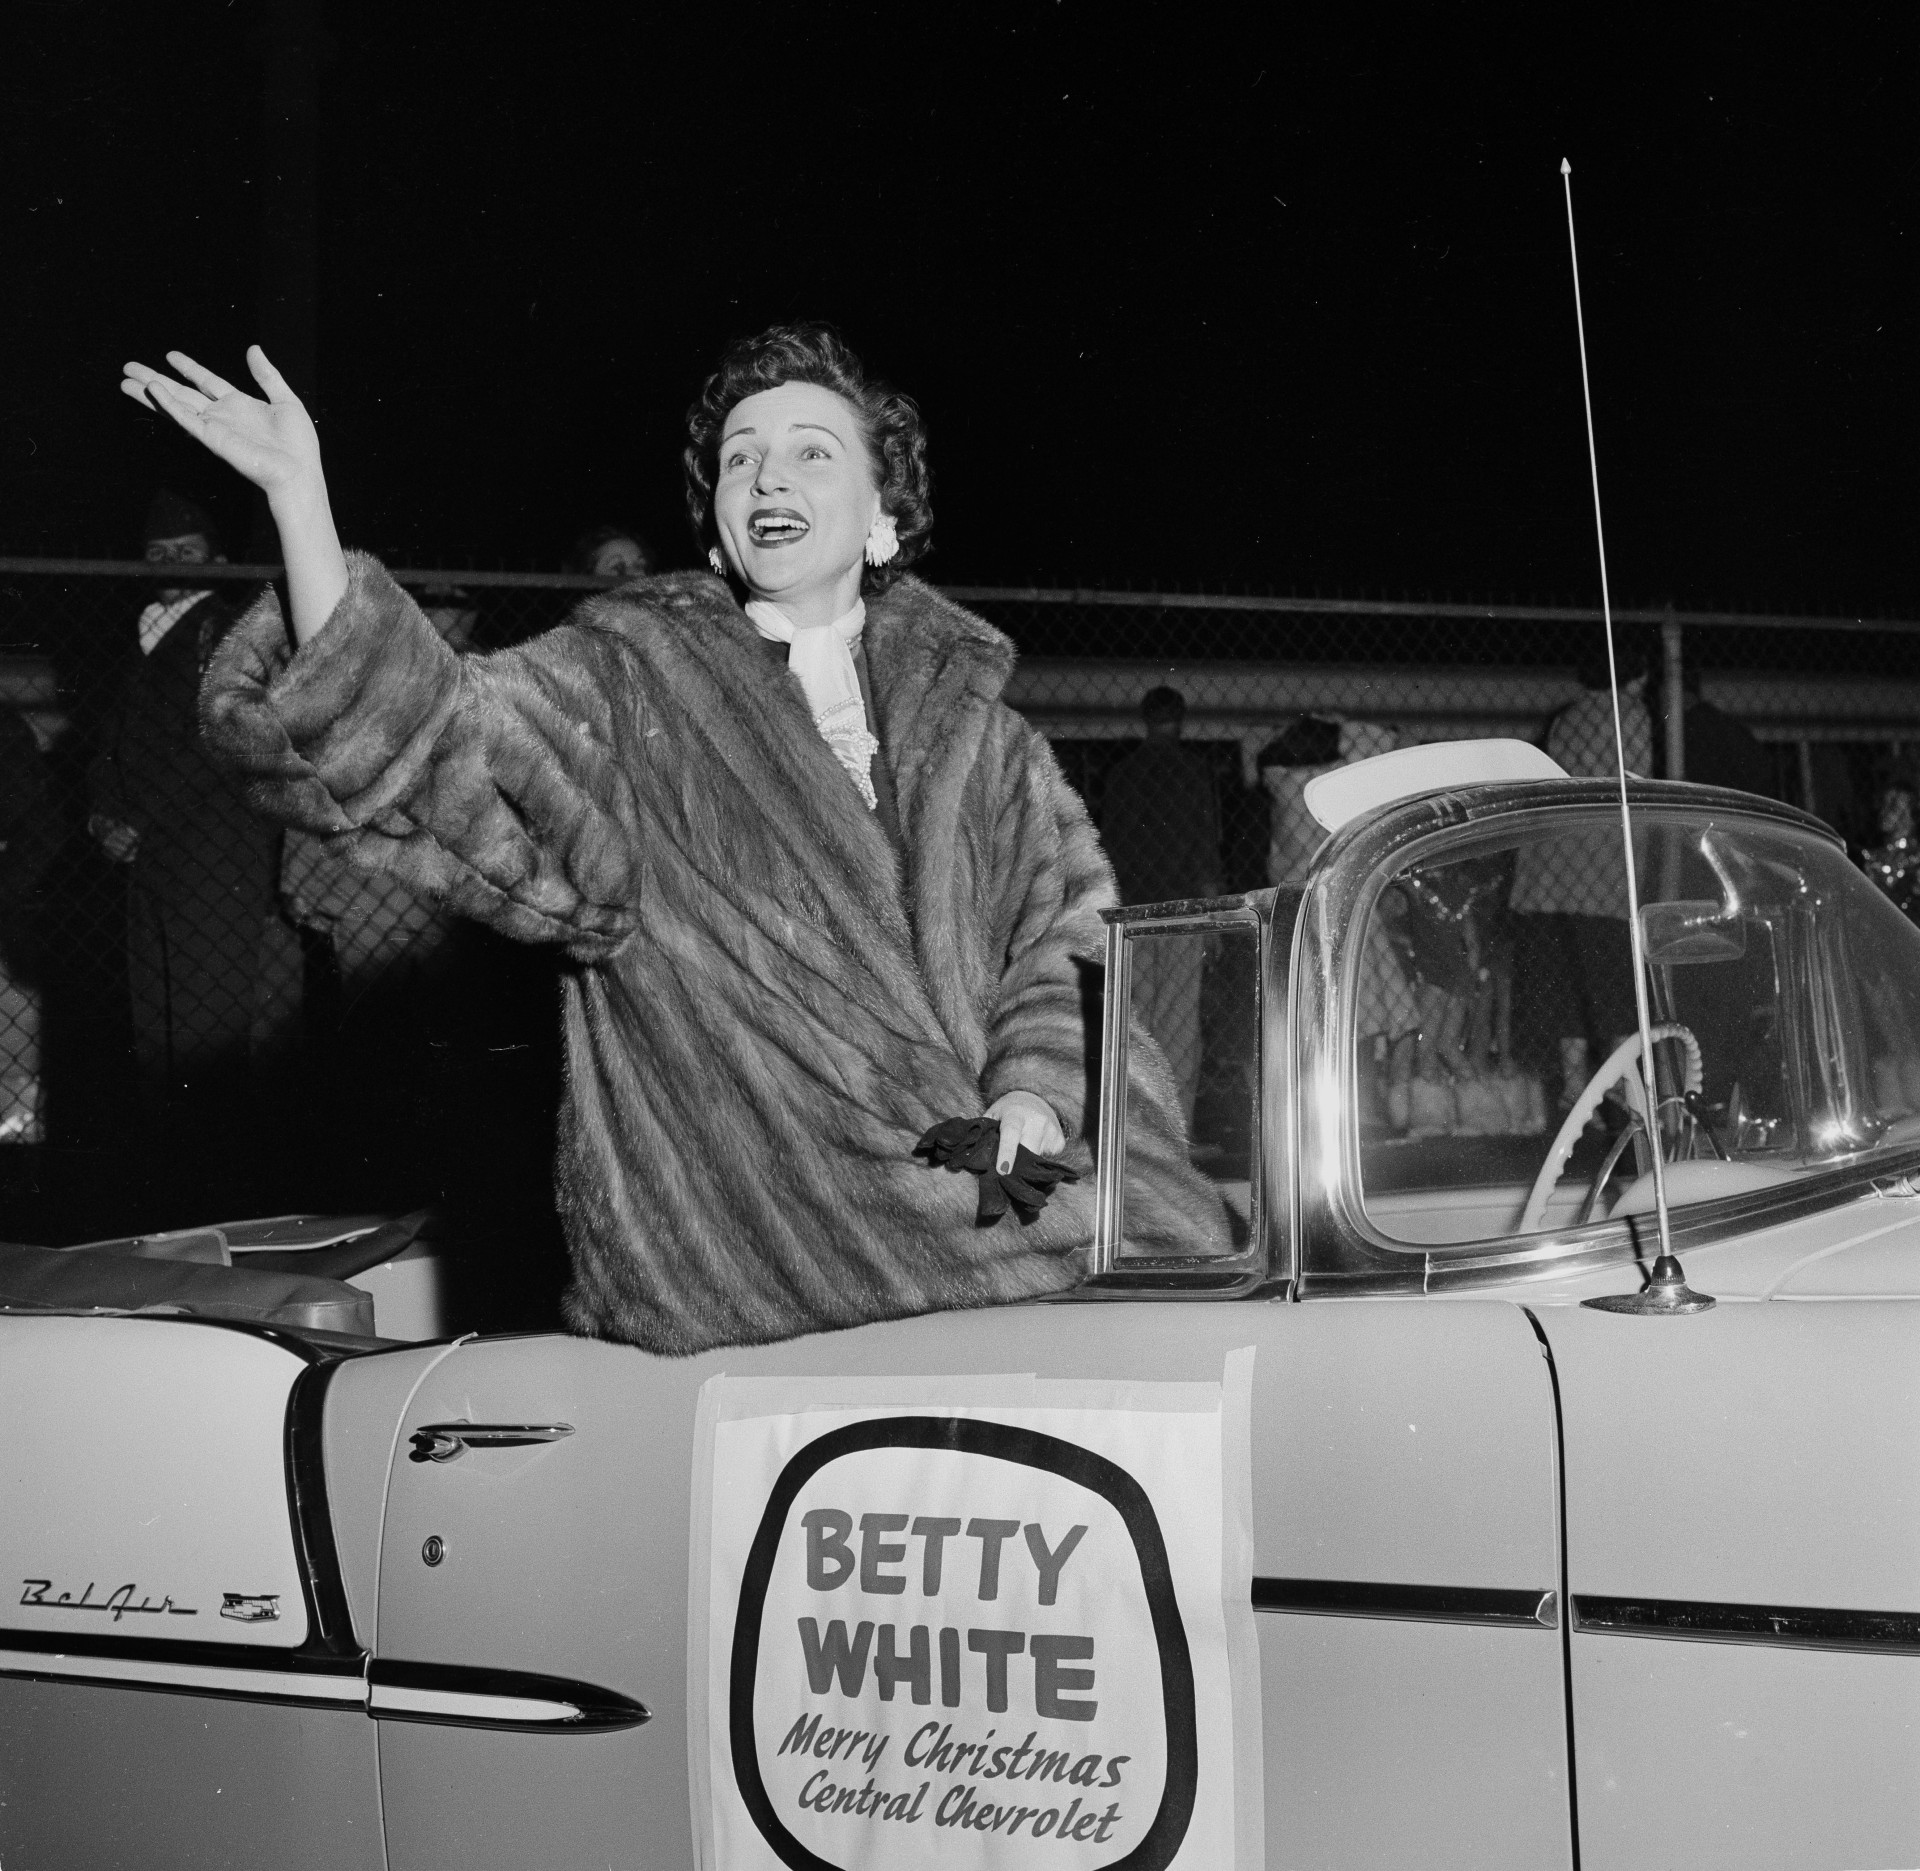 Betty White waves from a Chevrolet while wearing a fur coat